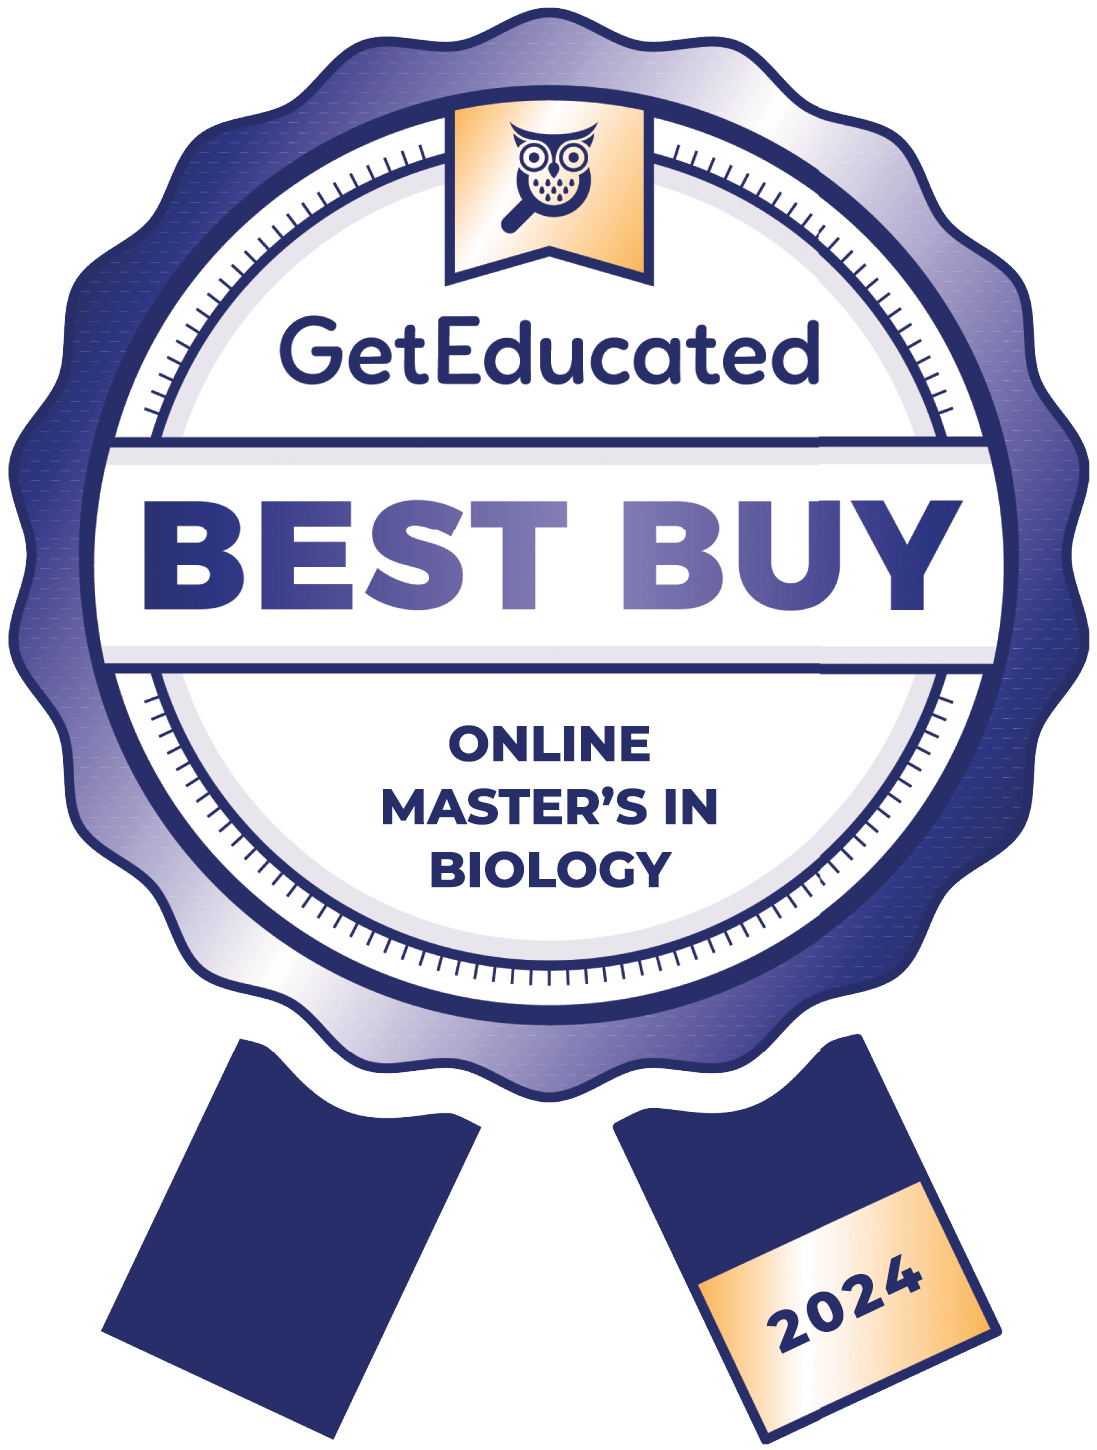 Rankings of the cheapest online master's in biology